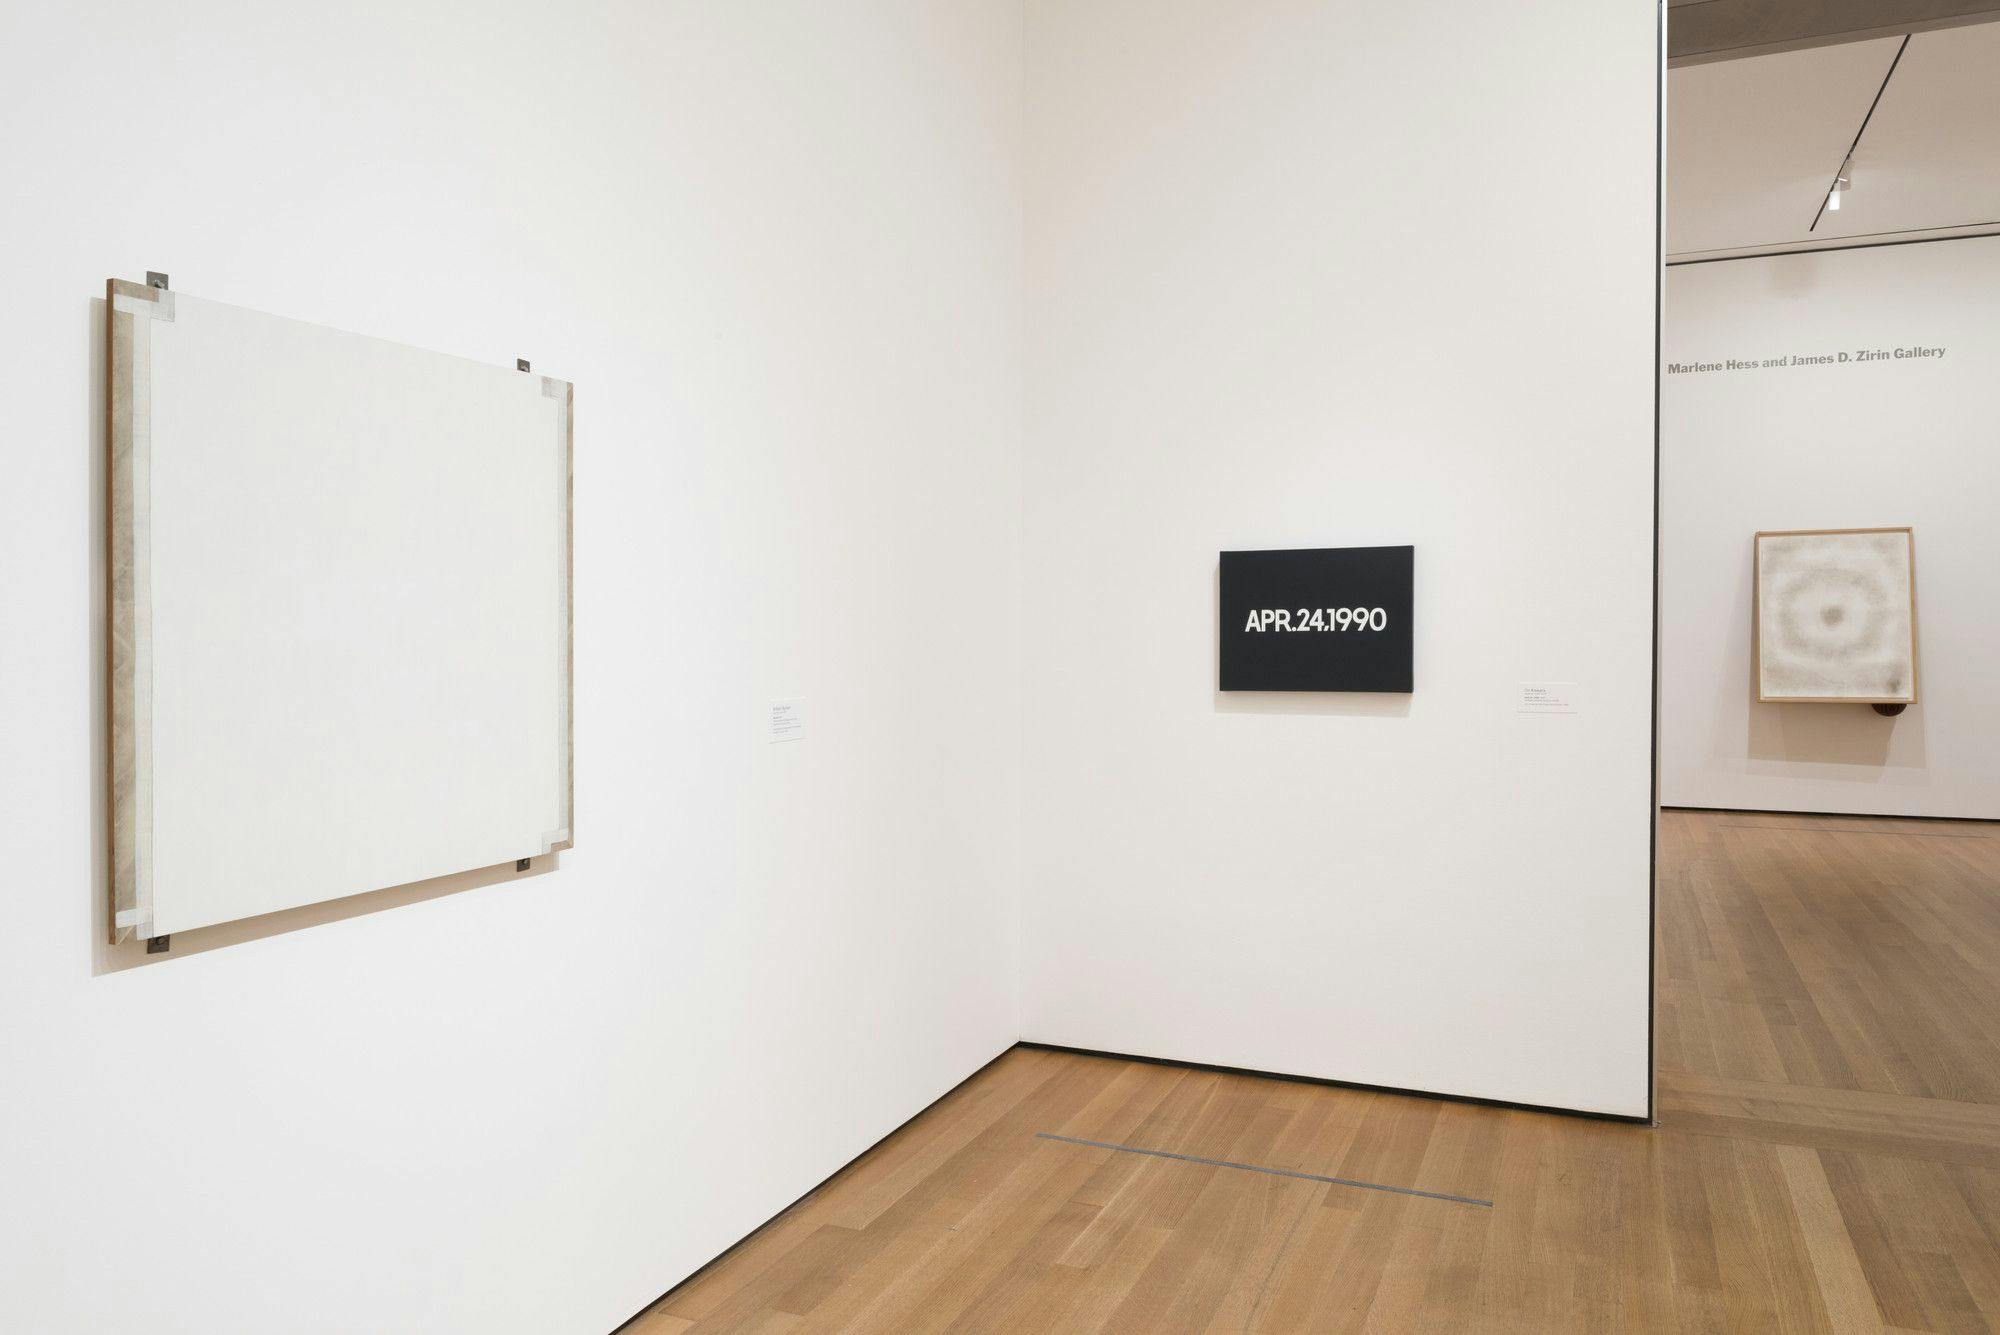 Installation view of the exhibition, Robert Ryman: The Long Run, at the Museum of Modern Art in new York, dated 2017 to 2018.